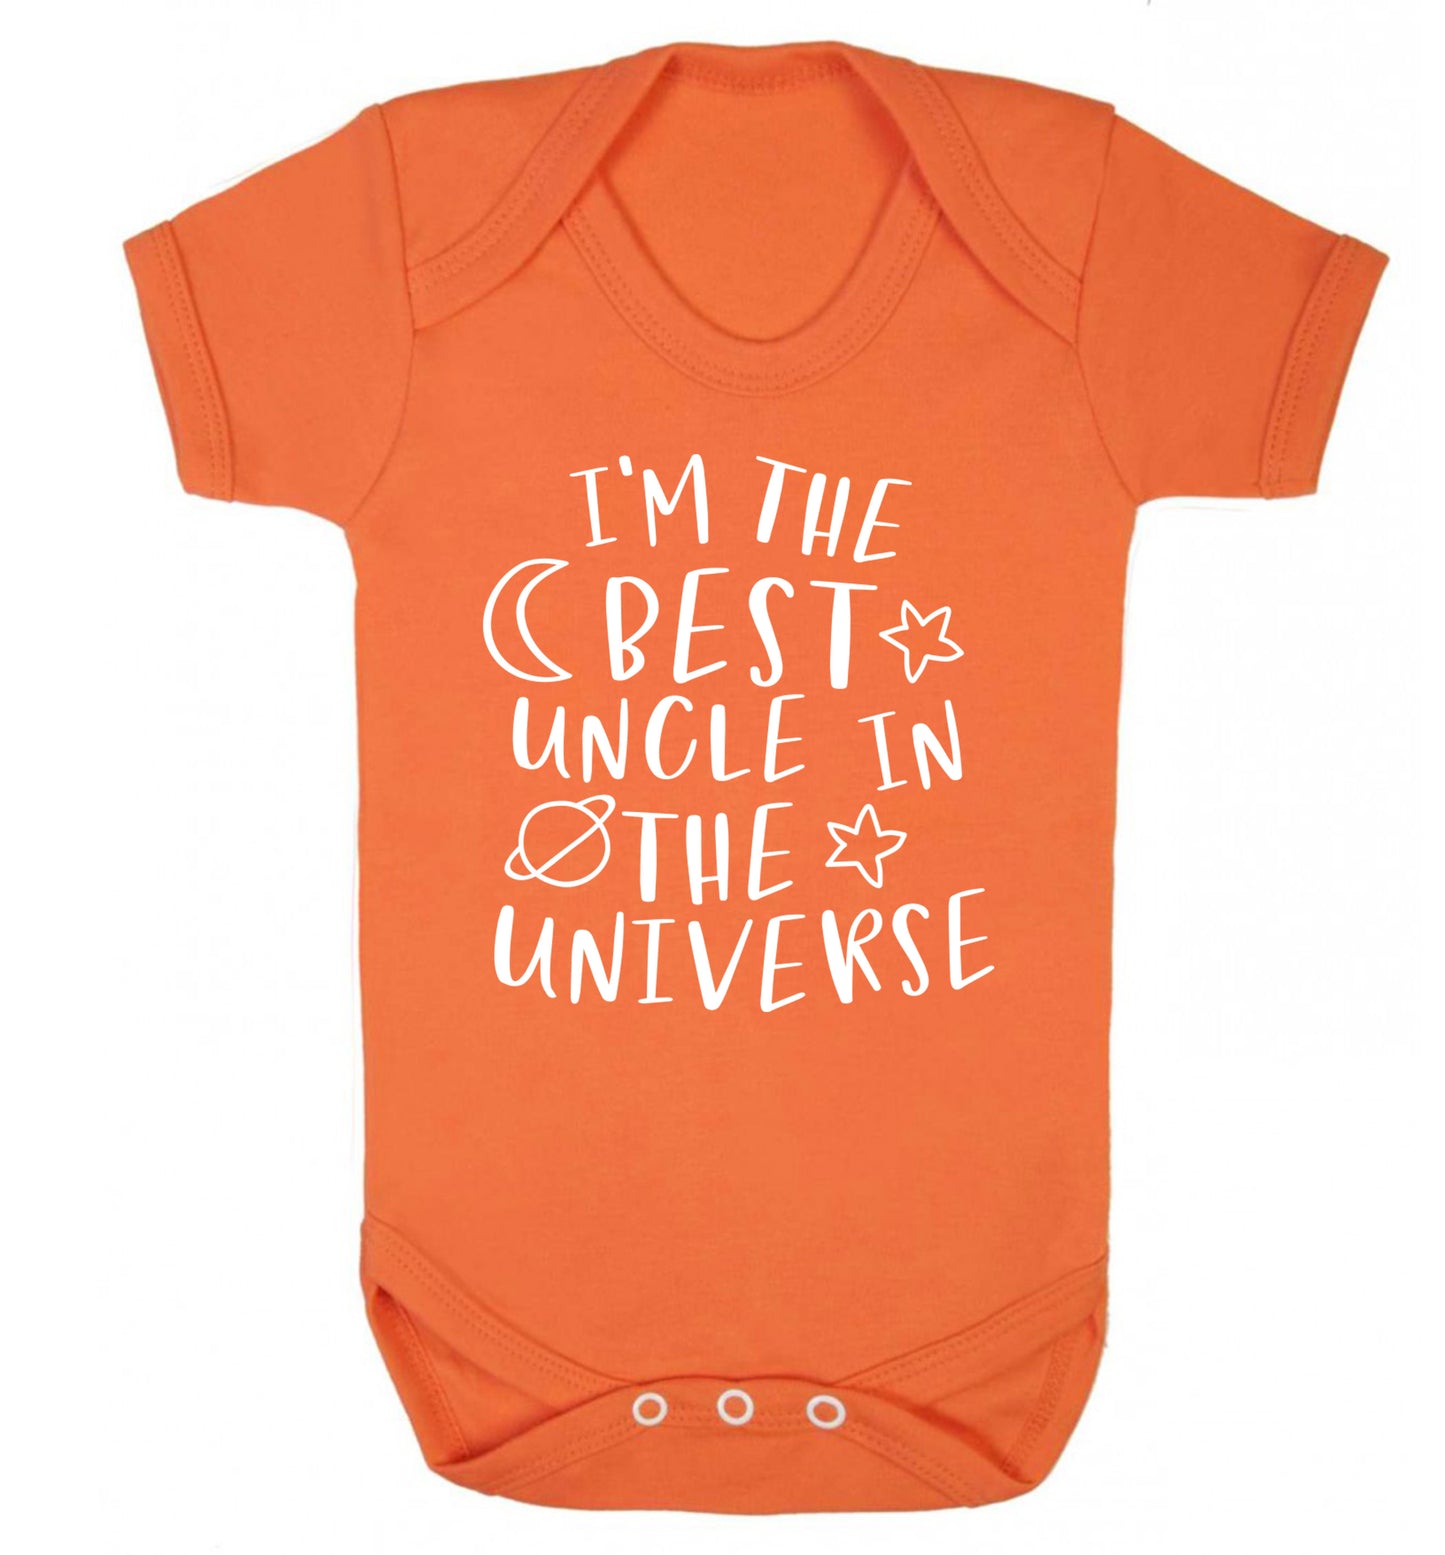 I'm the best uncle in the universe Baby Vest orange 18-24 months